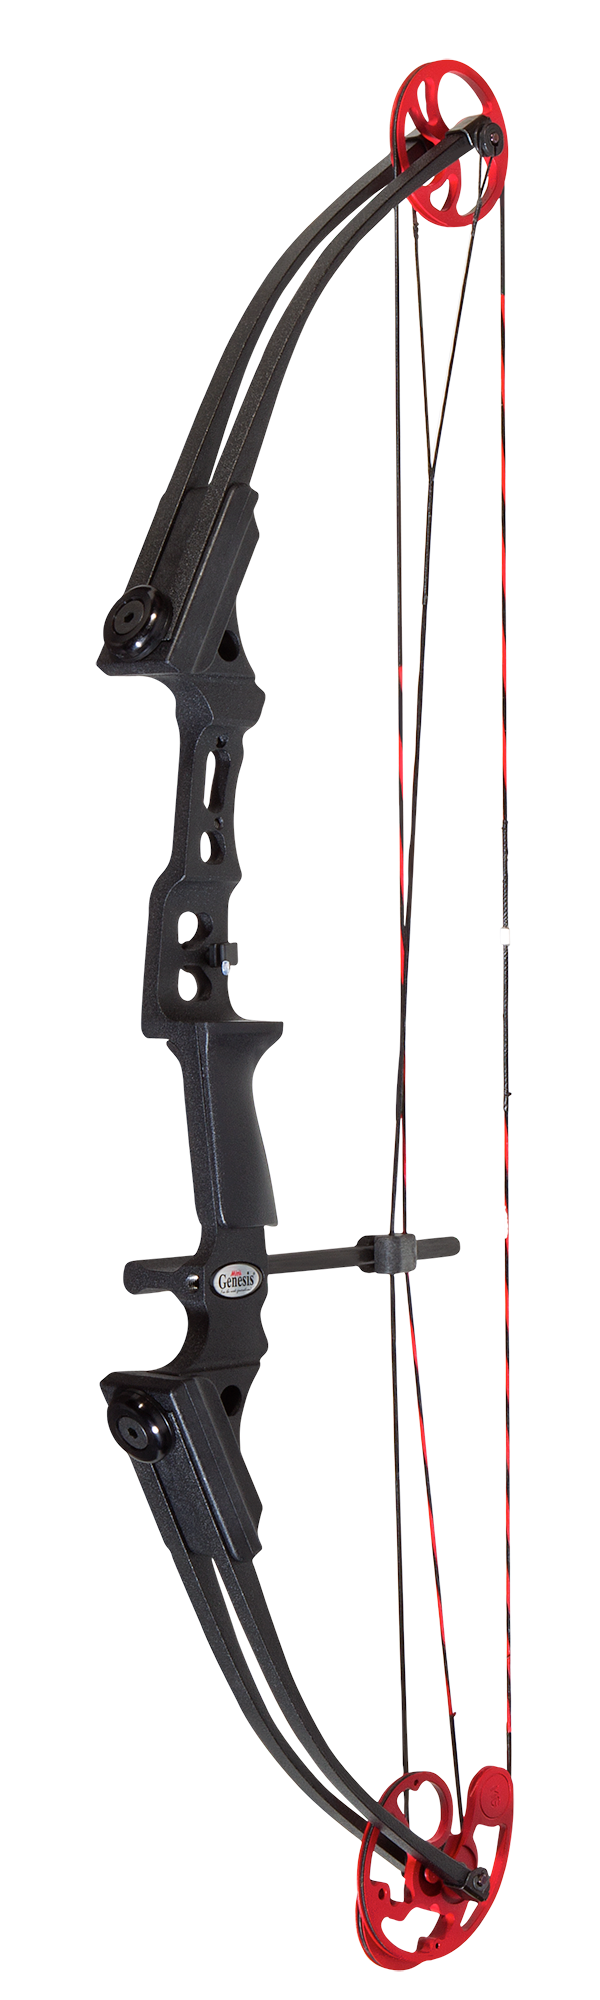 Genesis Mini Compound Bow Package for Youth - Black/Red - Right Hand